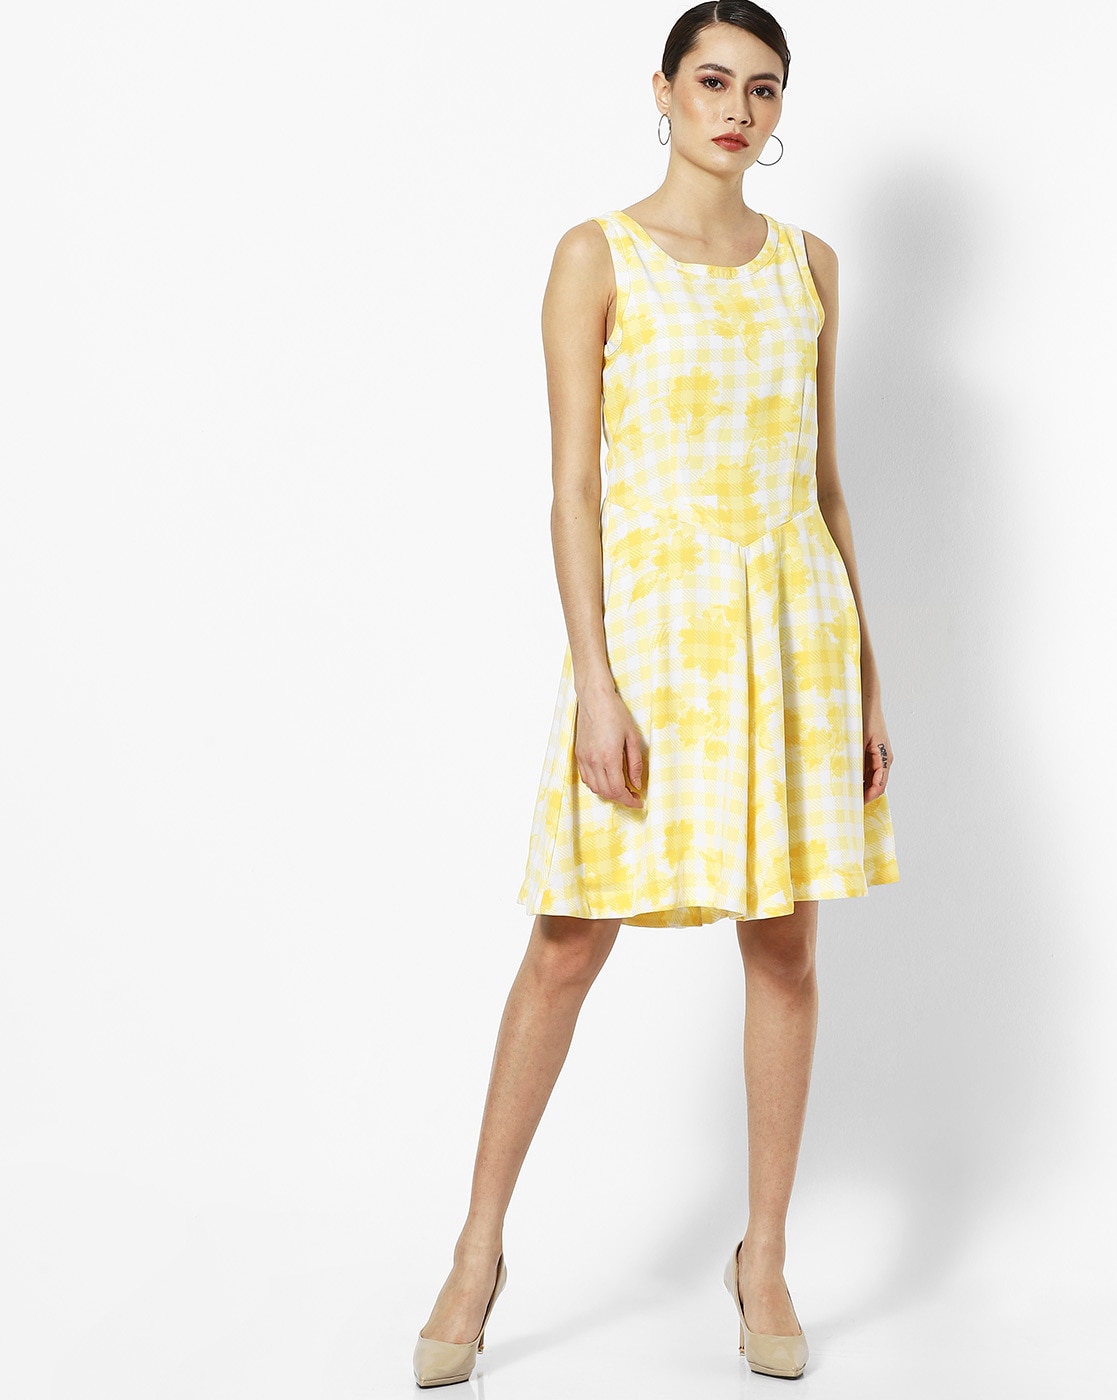 tommy hilfiger yellow floral dress